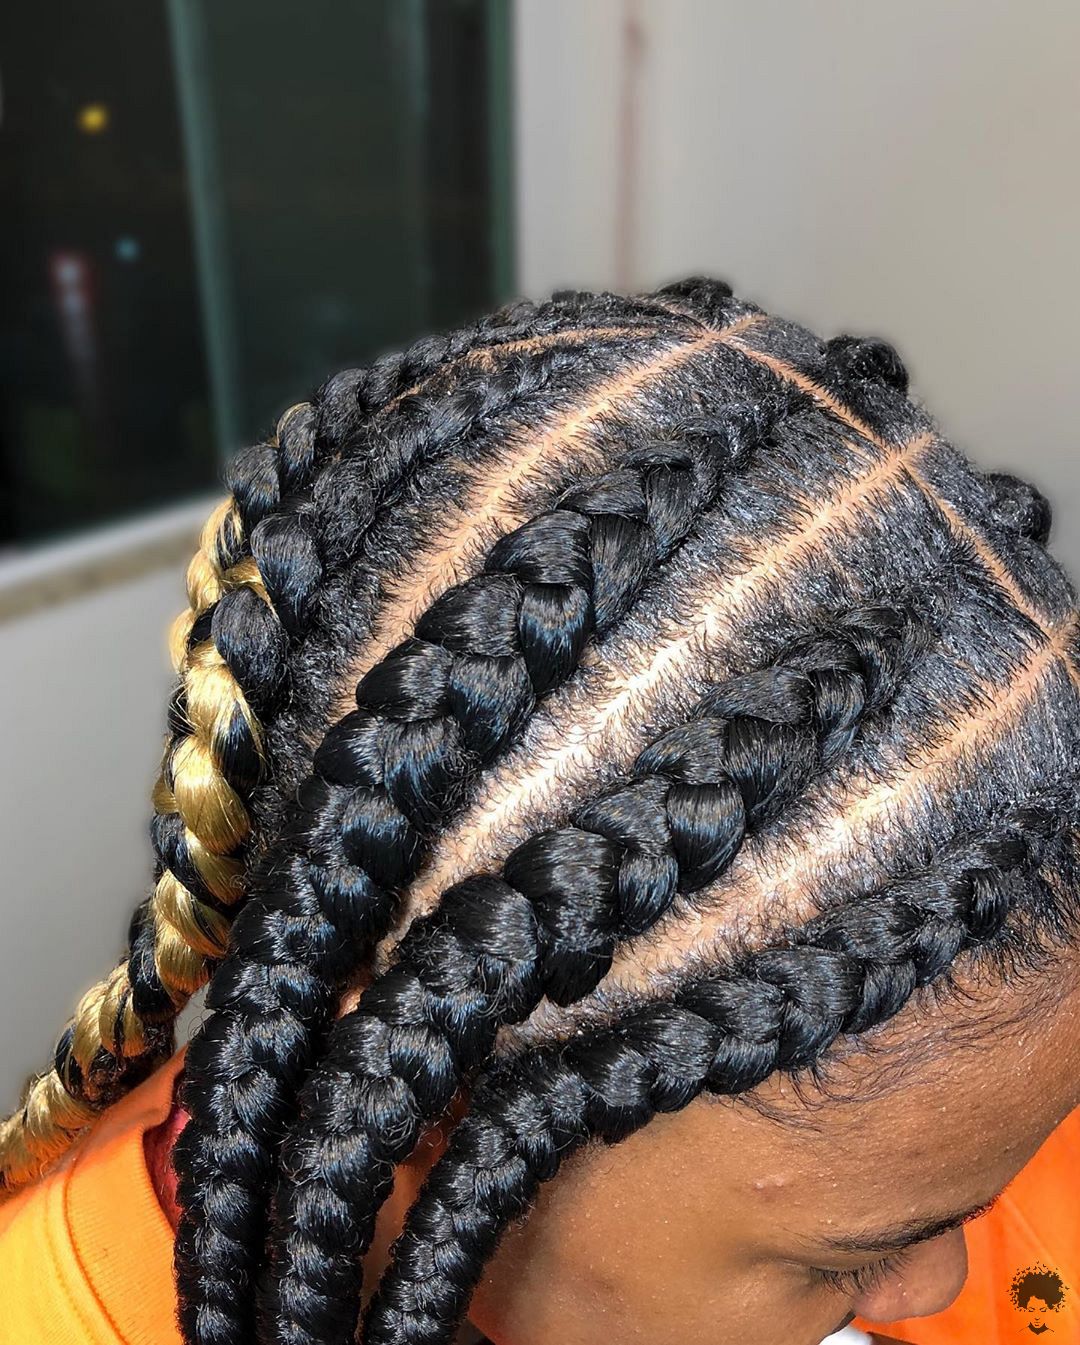 Best Ghana Braid Hairstyles For 2021 Amazing Ghana Braids To Try Out This Season 010